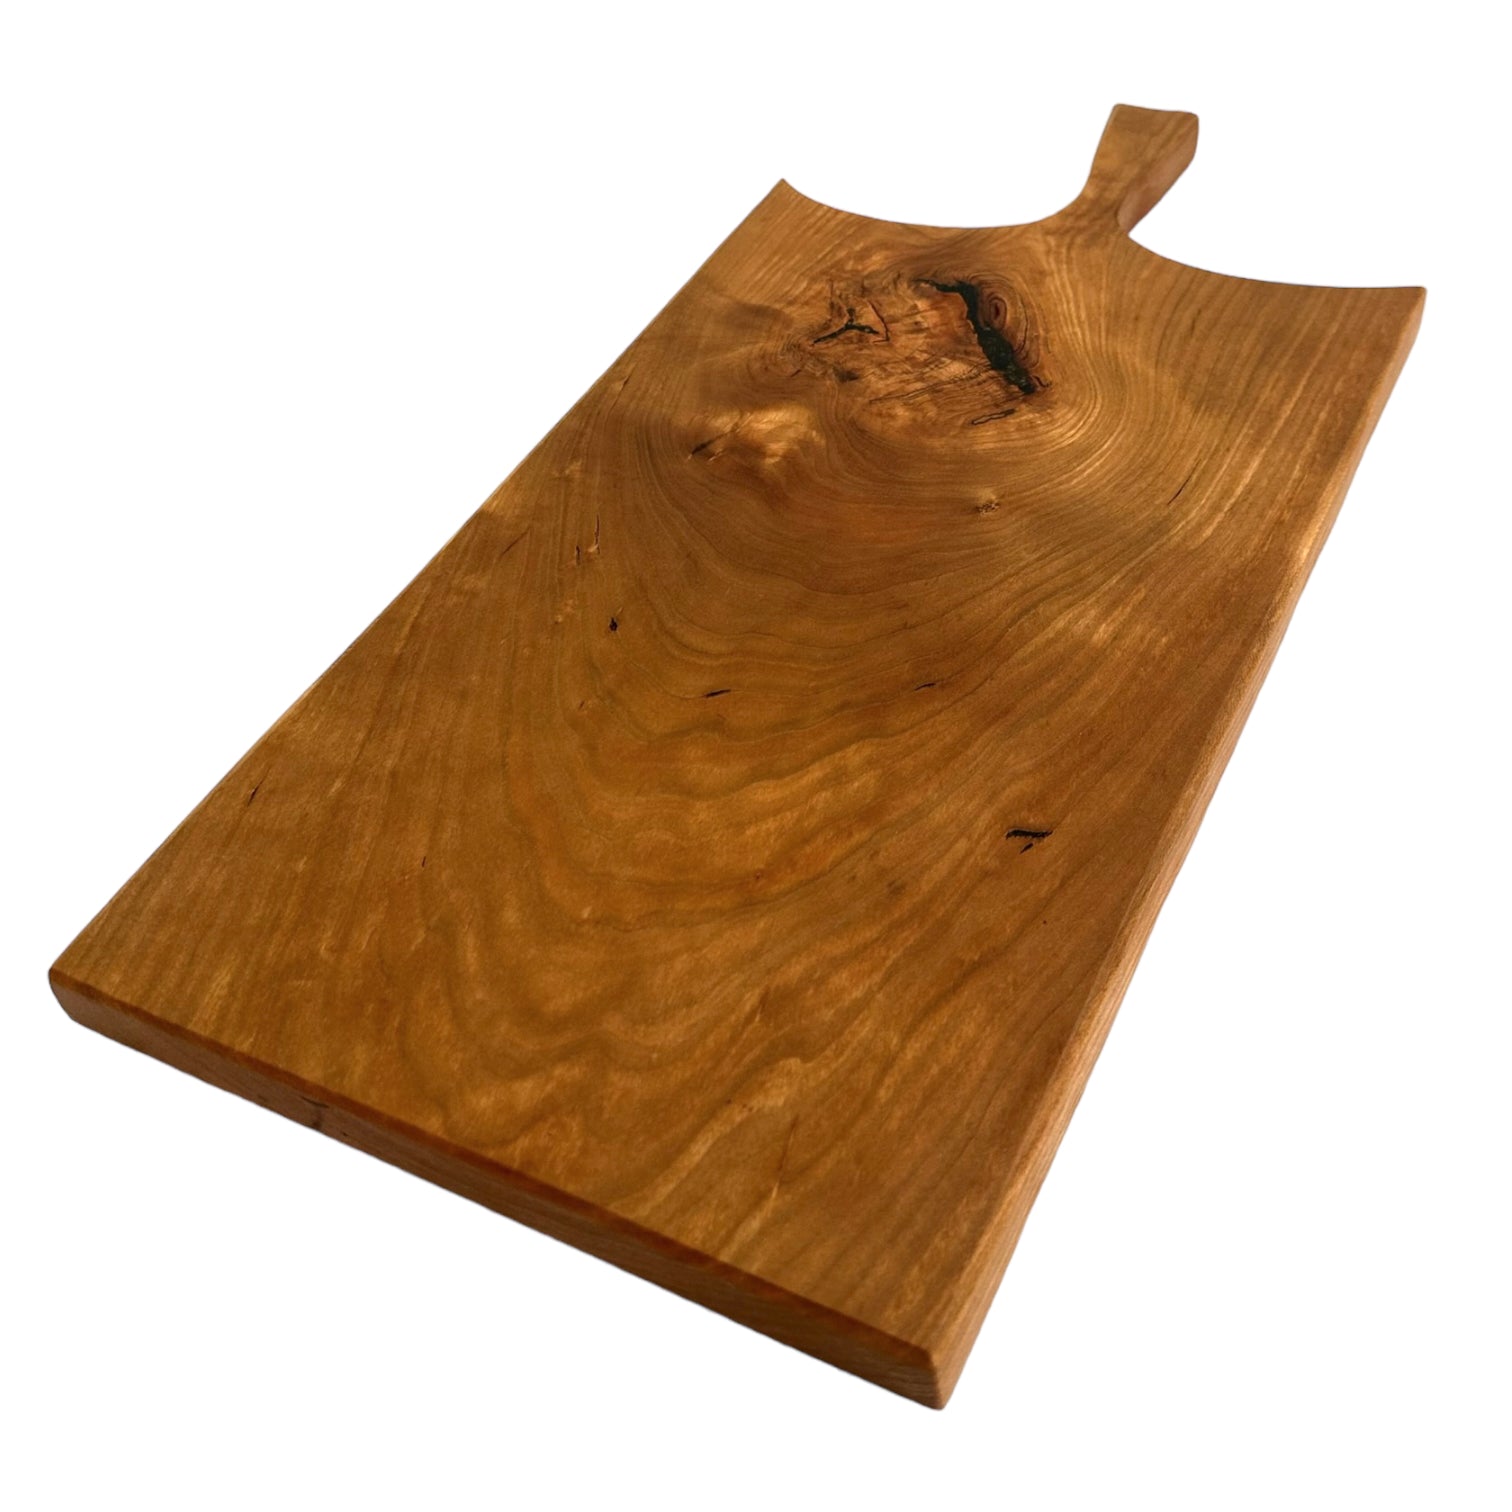 Rustic Handmade Wooden Charcuterie Boards - RTS cherry bottom wood grain deteil view